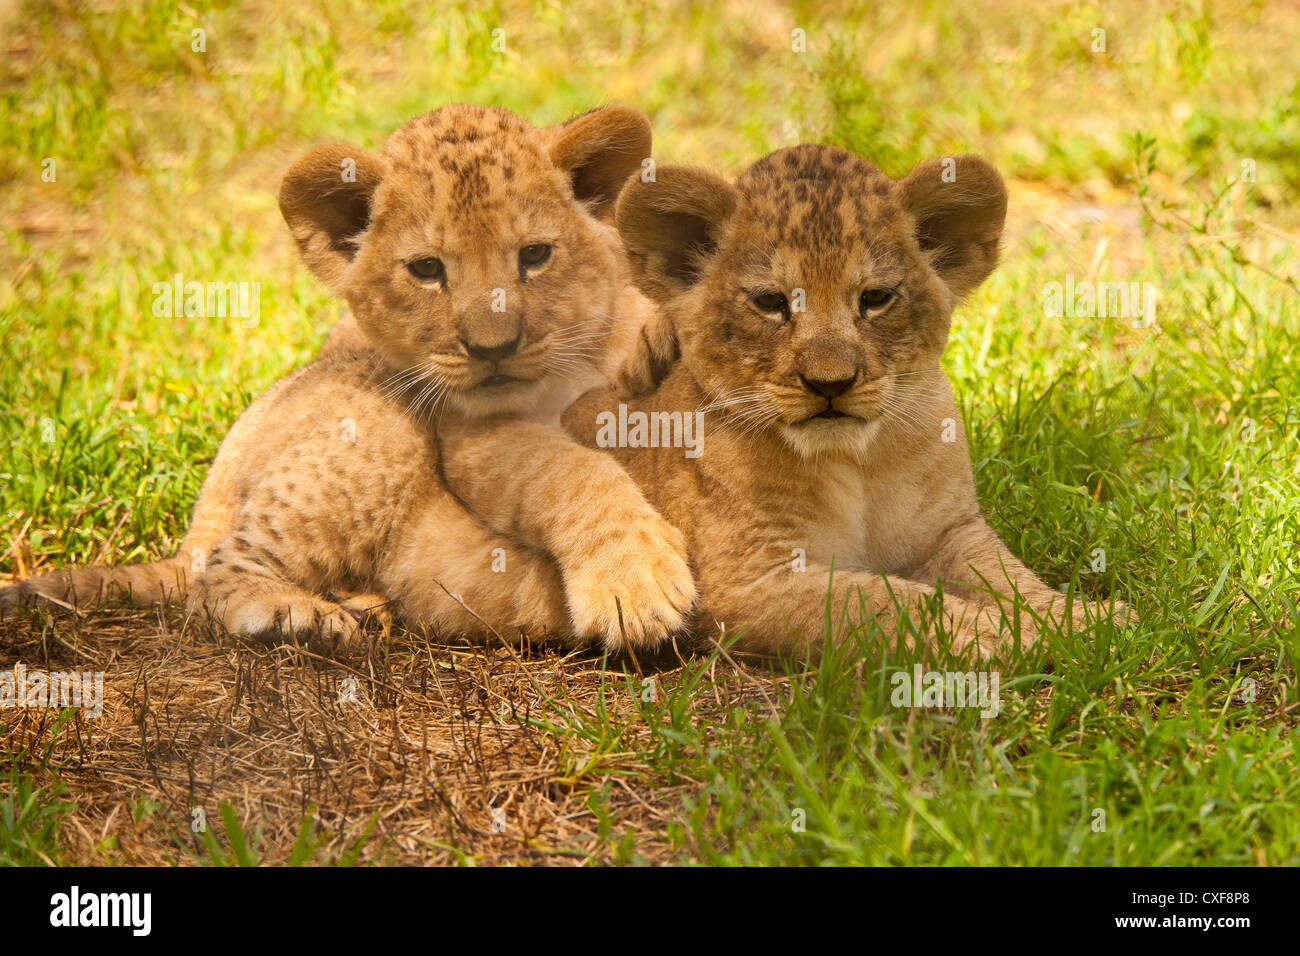 Barbary Lion Cubs (Panthera leo leo) Sitting Together Stock Photo